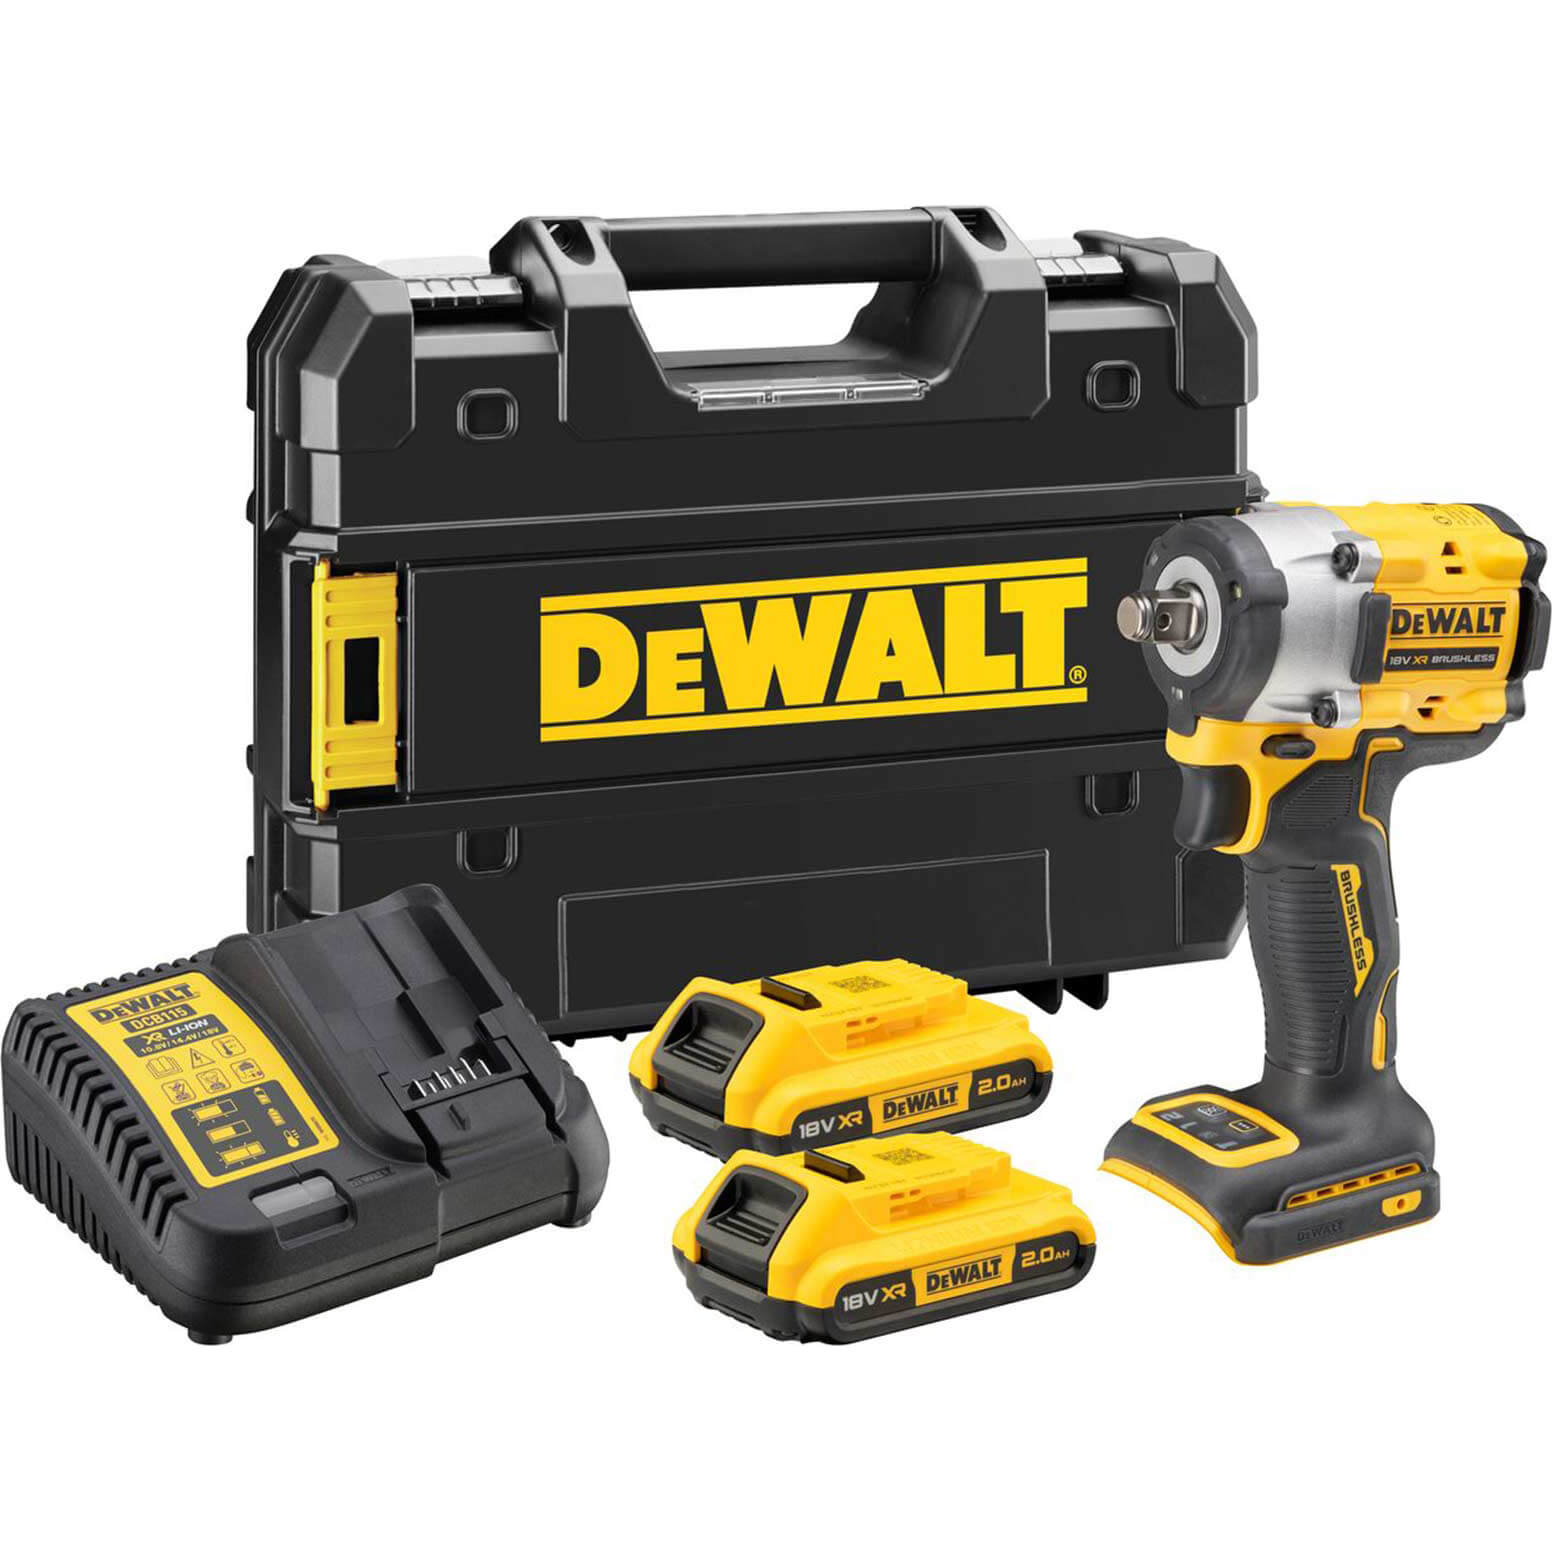 Image of DeWalt DCF921 18v XR Cordless Brushless 1/2" Compact Impact Wrench 2 x 2ah Li-ion Charger Case